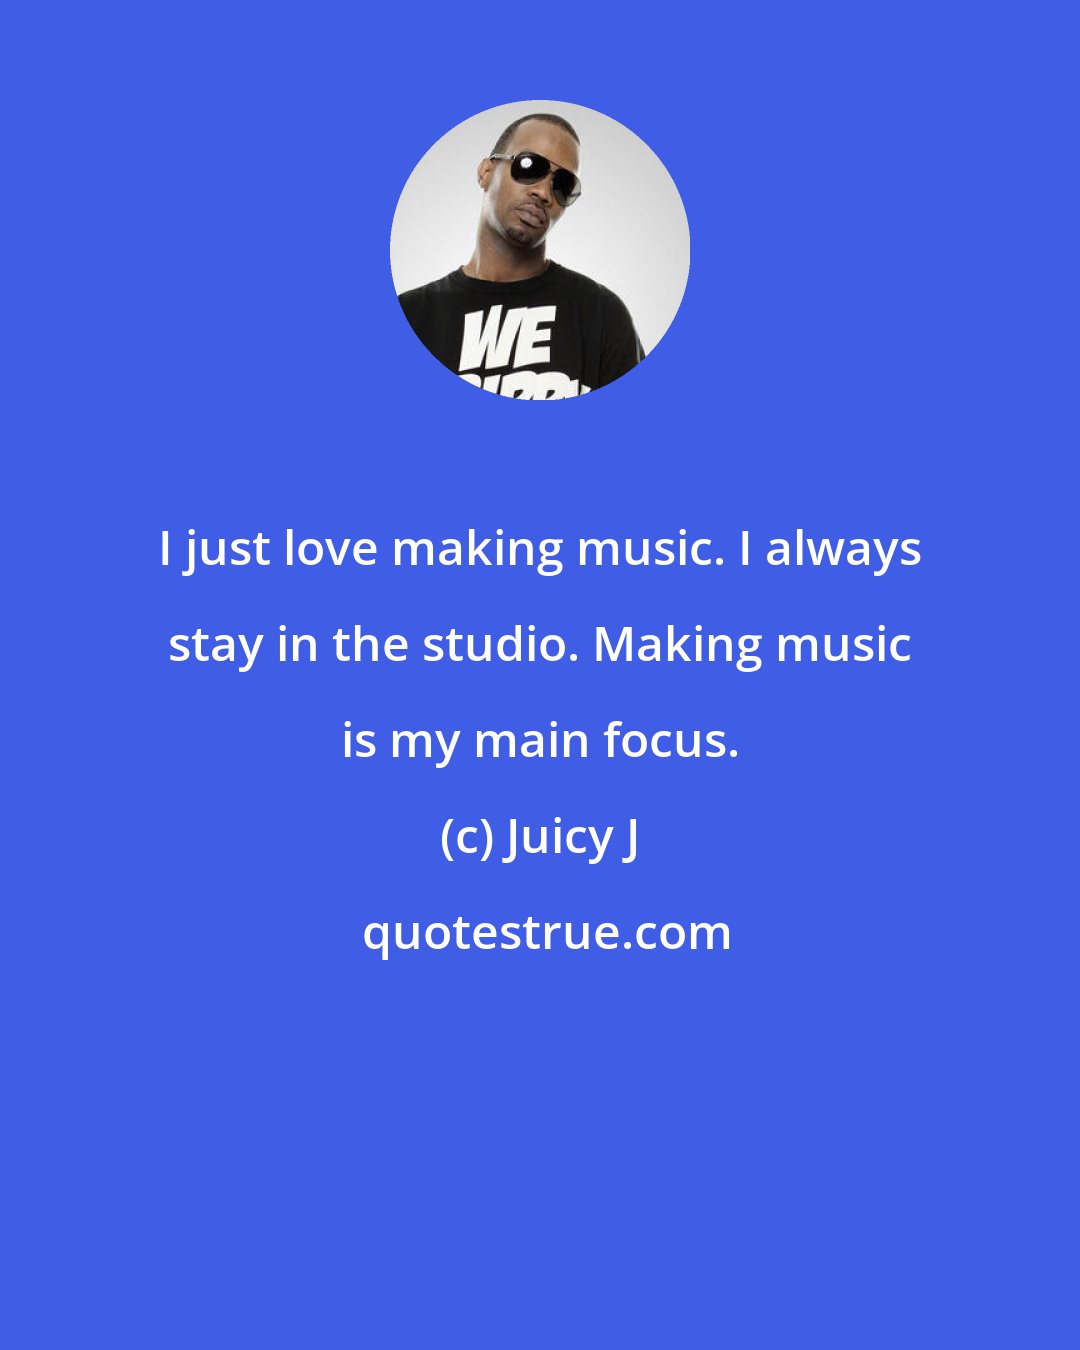 Juicy J: I just love making music. I always stay in the studio. Making music is my main focus.